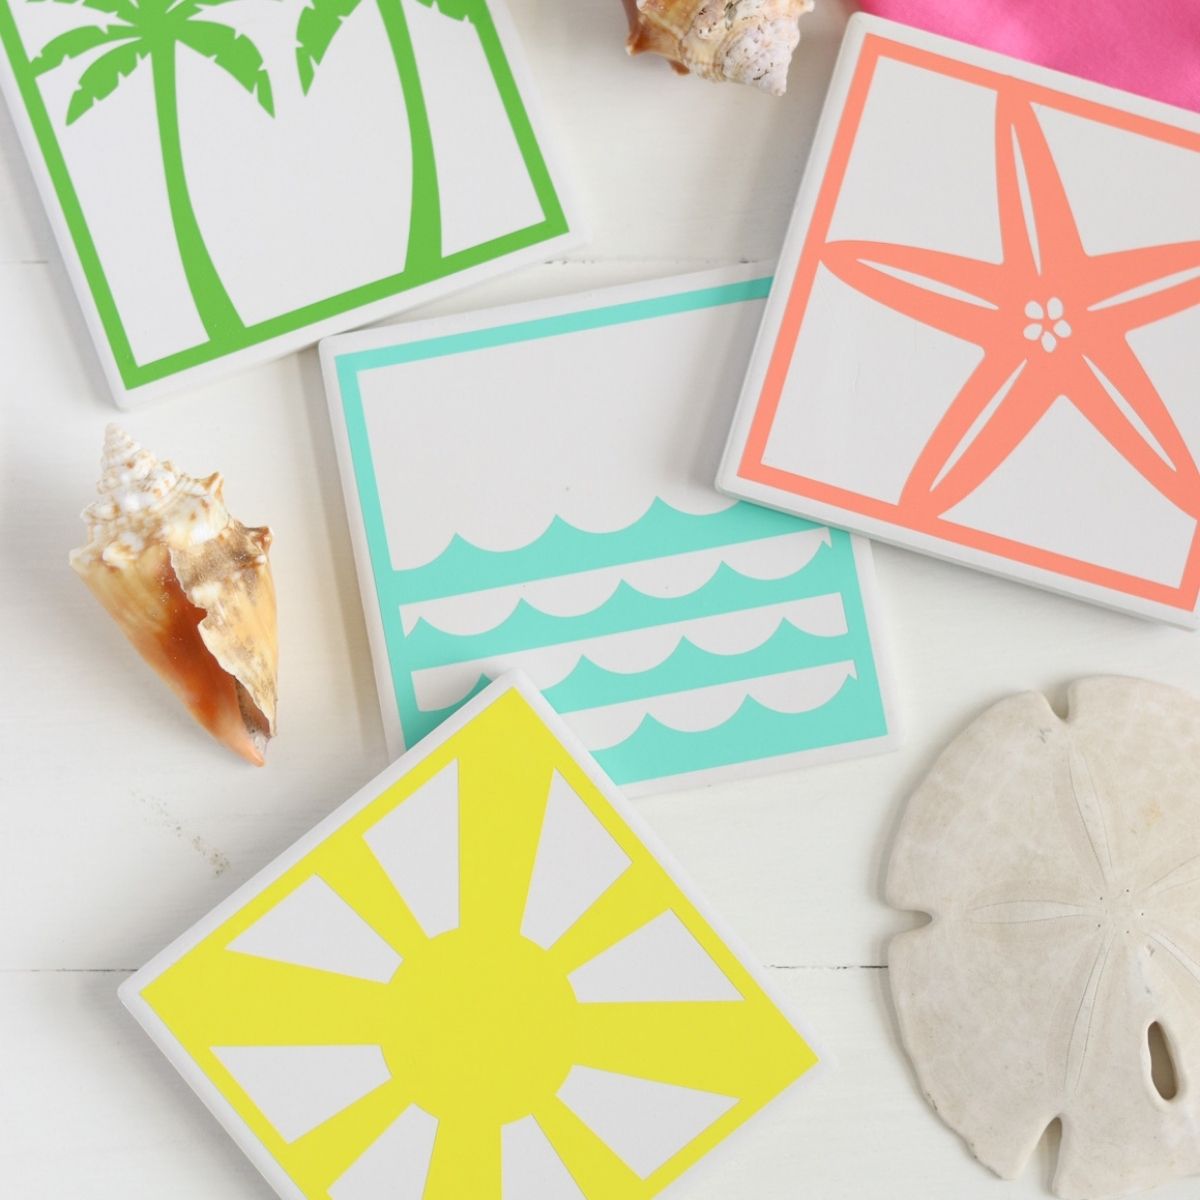 Making Coasters with Cricut